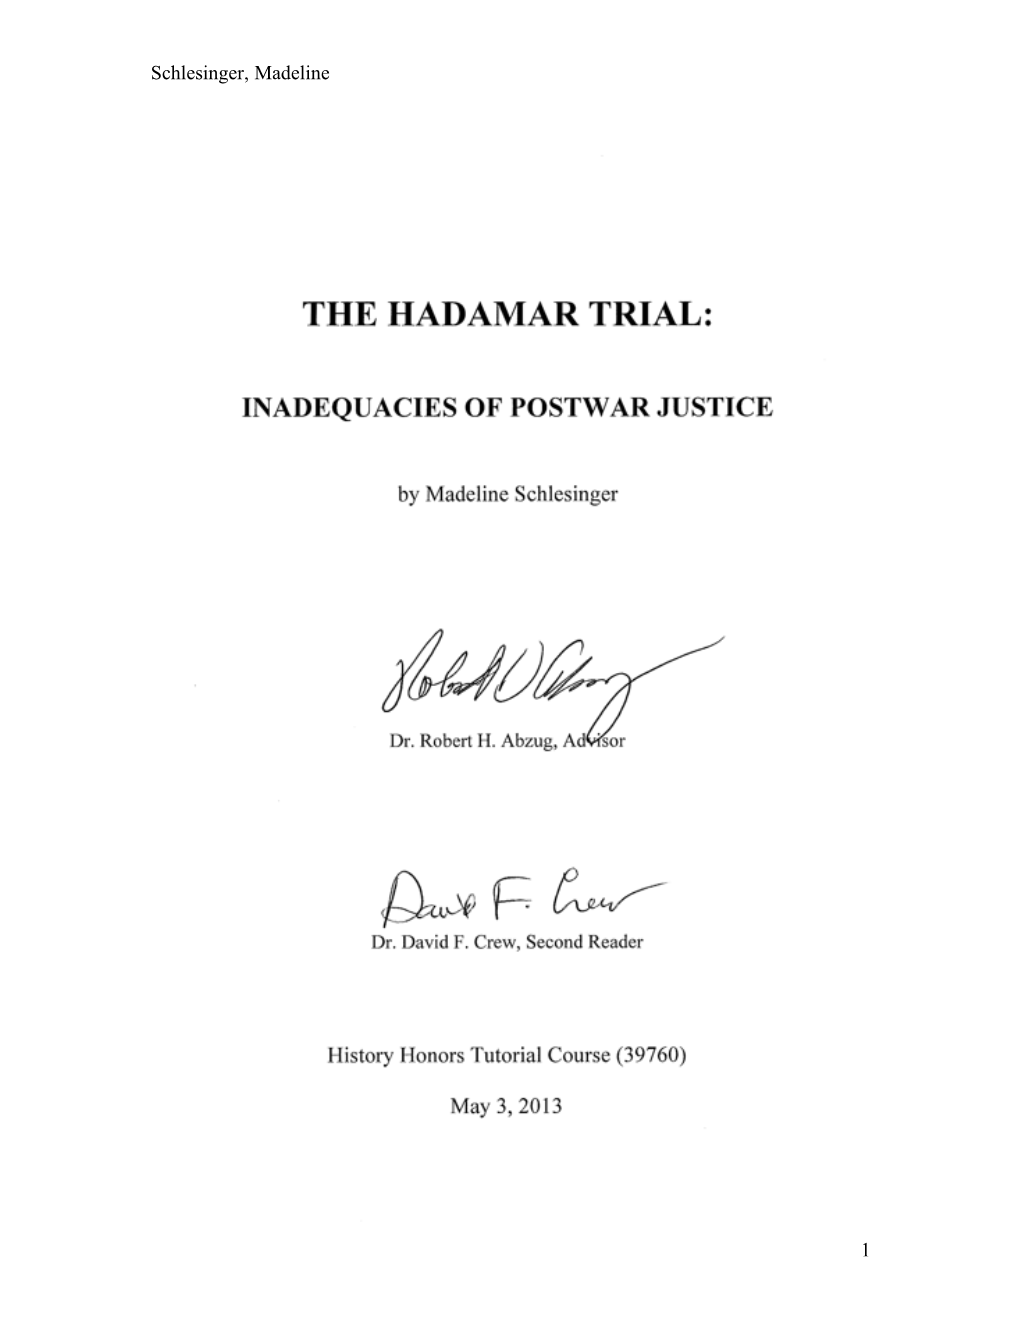 The Hadamar Trial Set Precedent for War Crimes Trials and the Rewriting of International Law to Include the Charge of Crimes Against Humanity